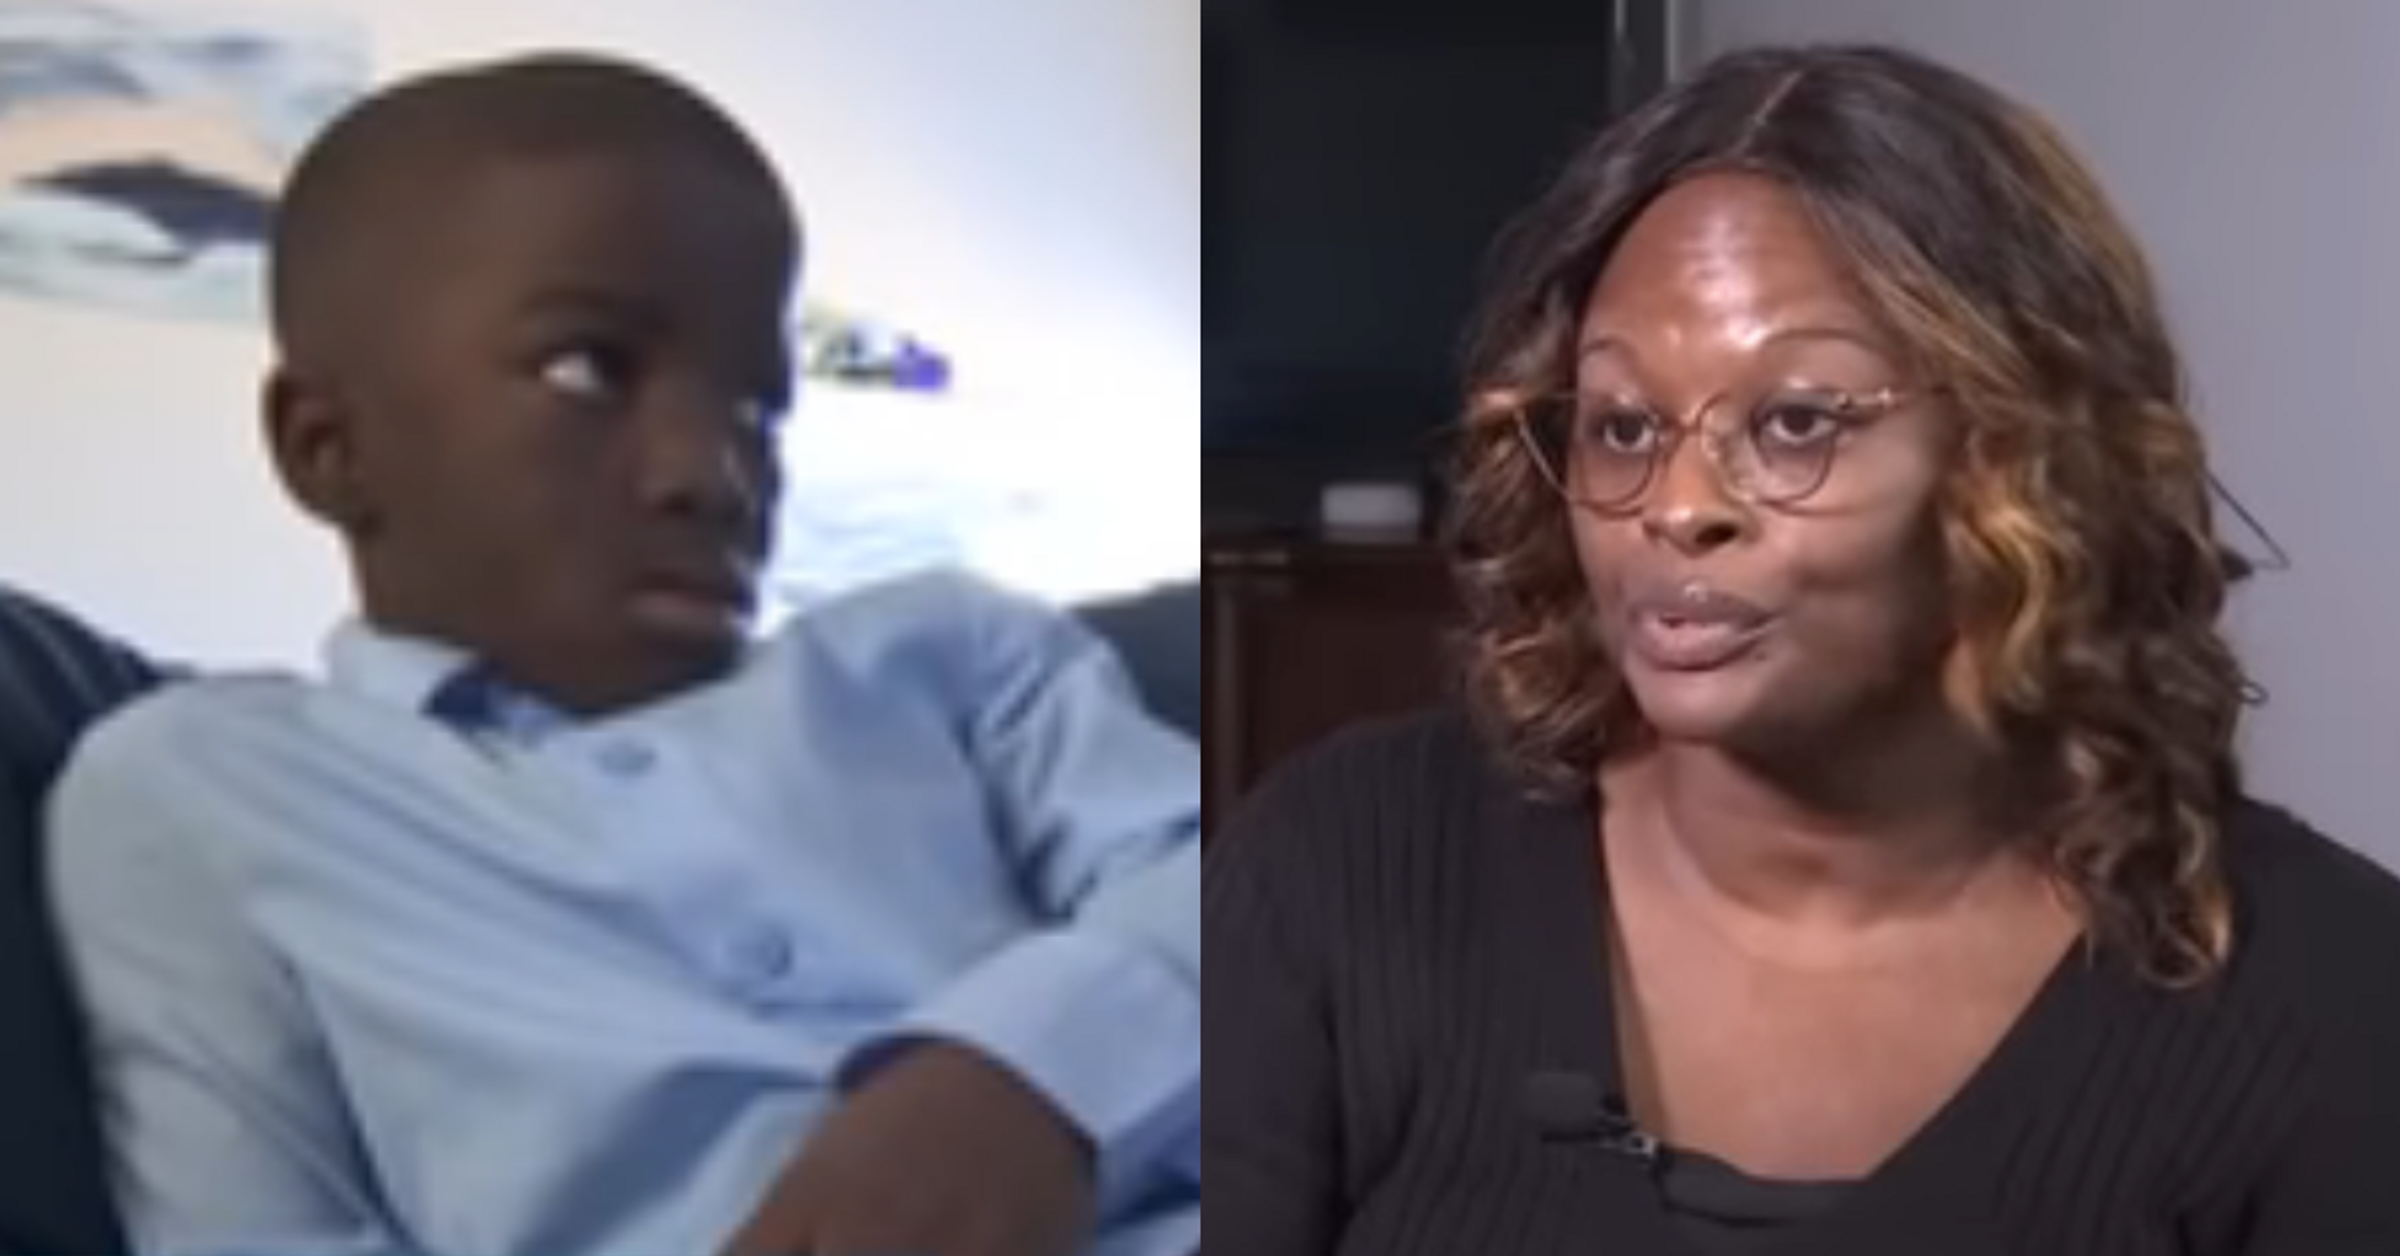 Texas School Investigating After Outraged Mom Claims Son’s Teacher Taped Him To His Chair (comicsands.com)